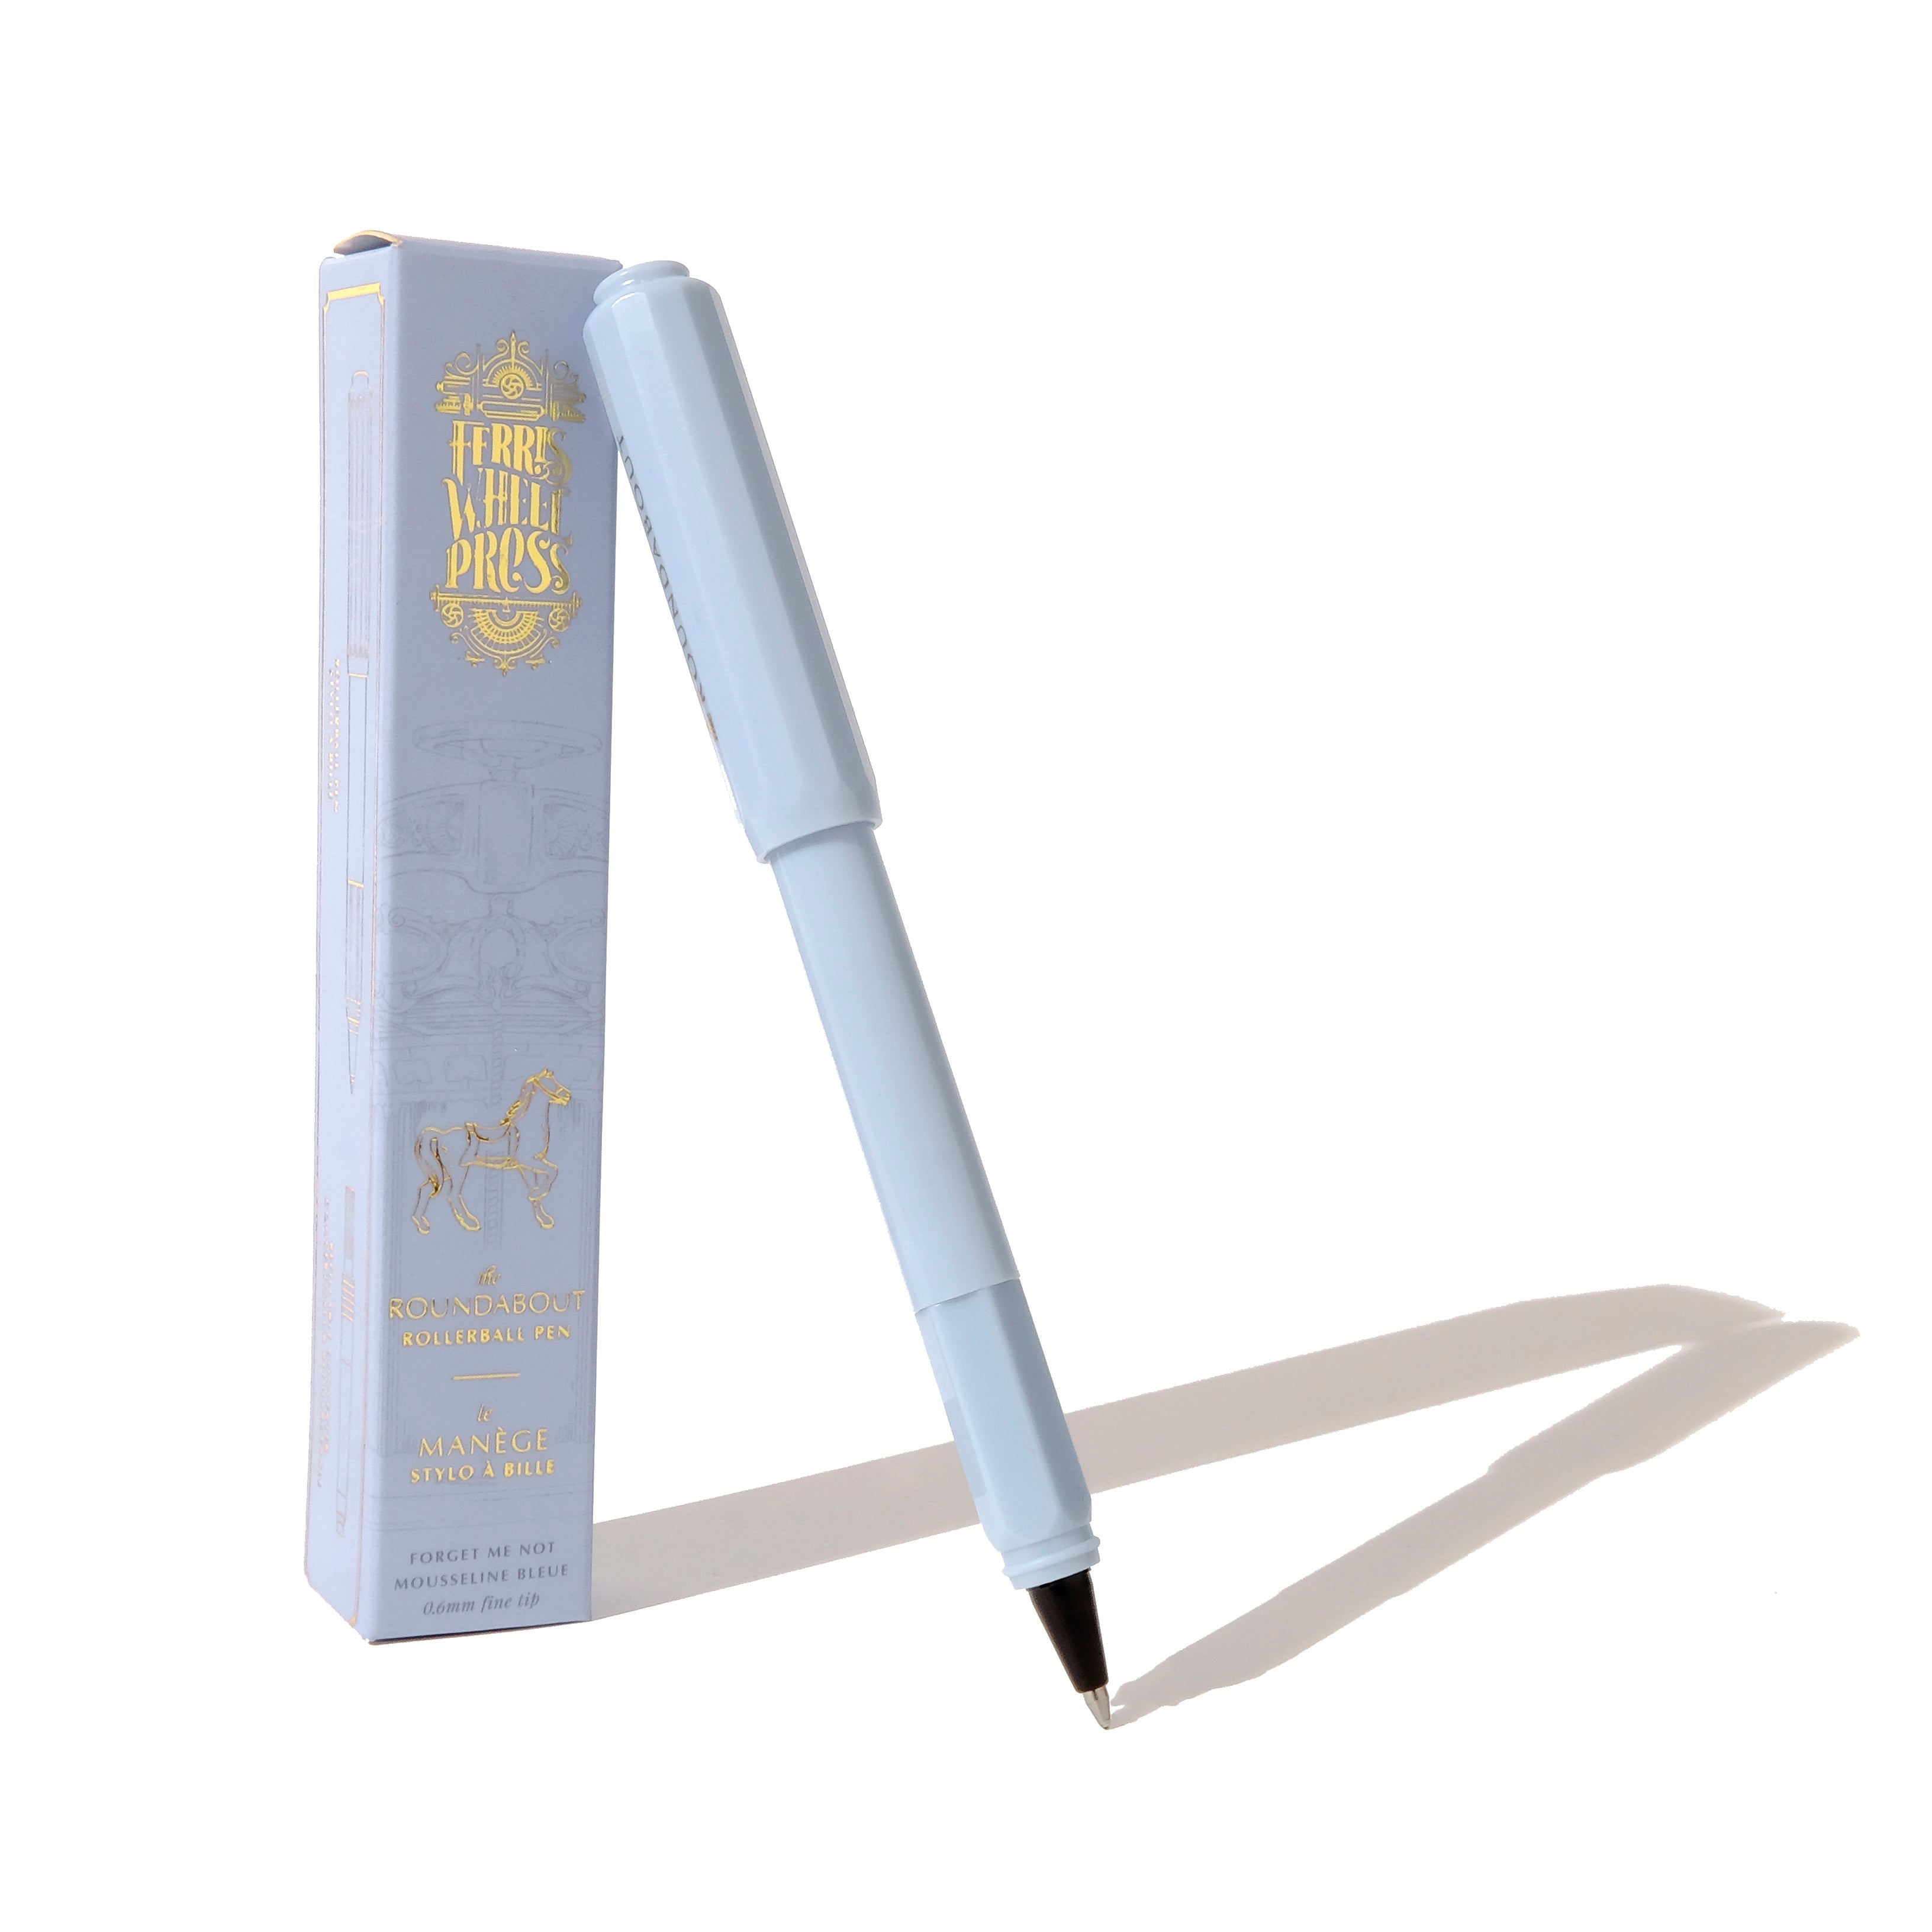 The Roundabout Rollerball Pen - Forget Me Not